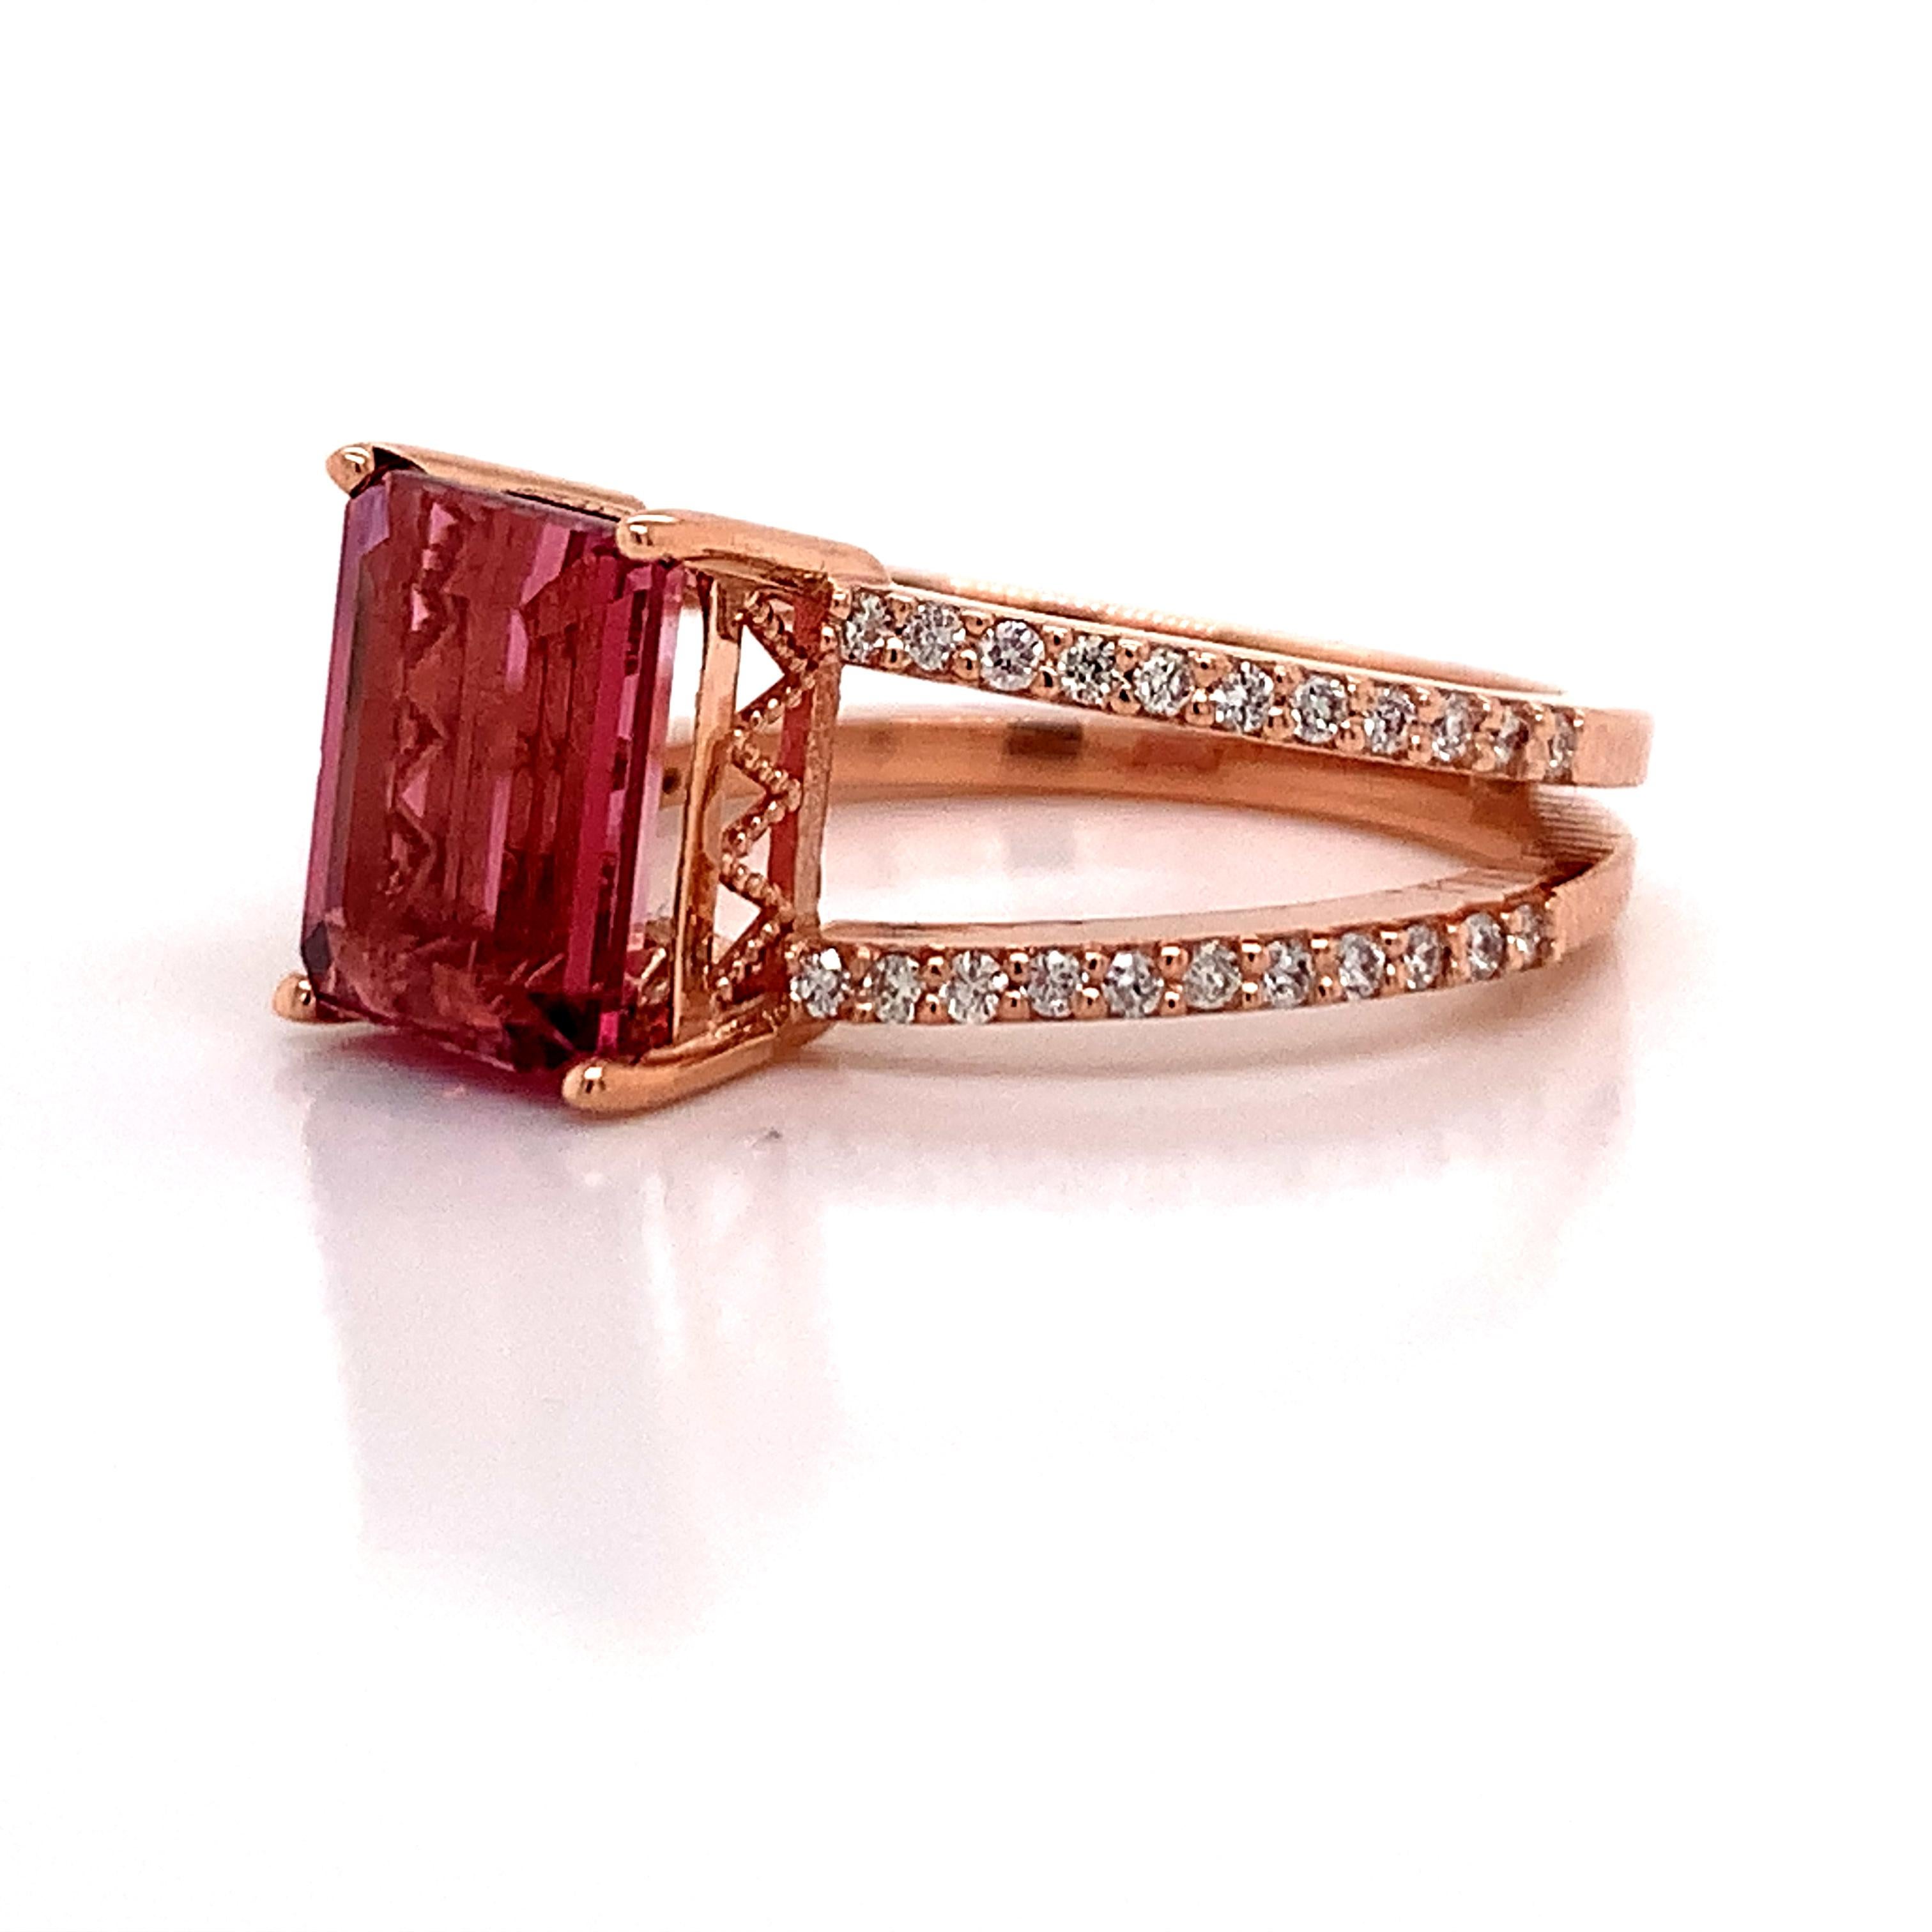 Natural Tourmaline Diamond Ring 14k Rose Gold 2.2 TCW Certified For Sale 4